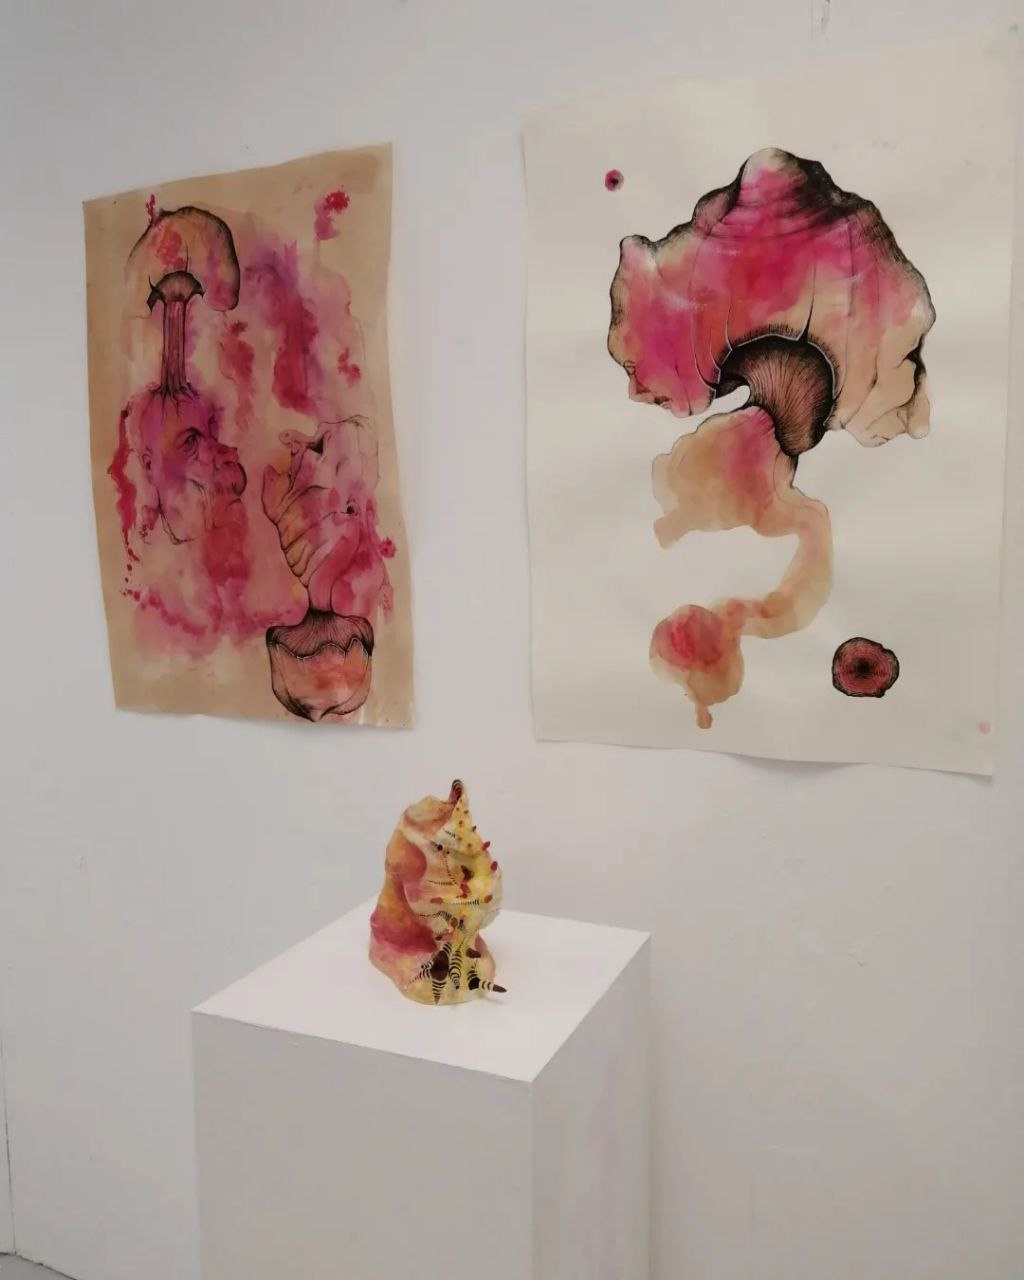 A ceramic shell beneath two abstract watercolour drawings on paper.